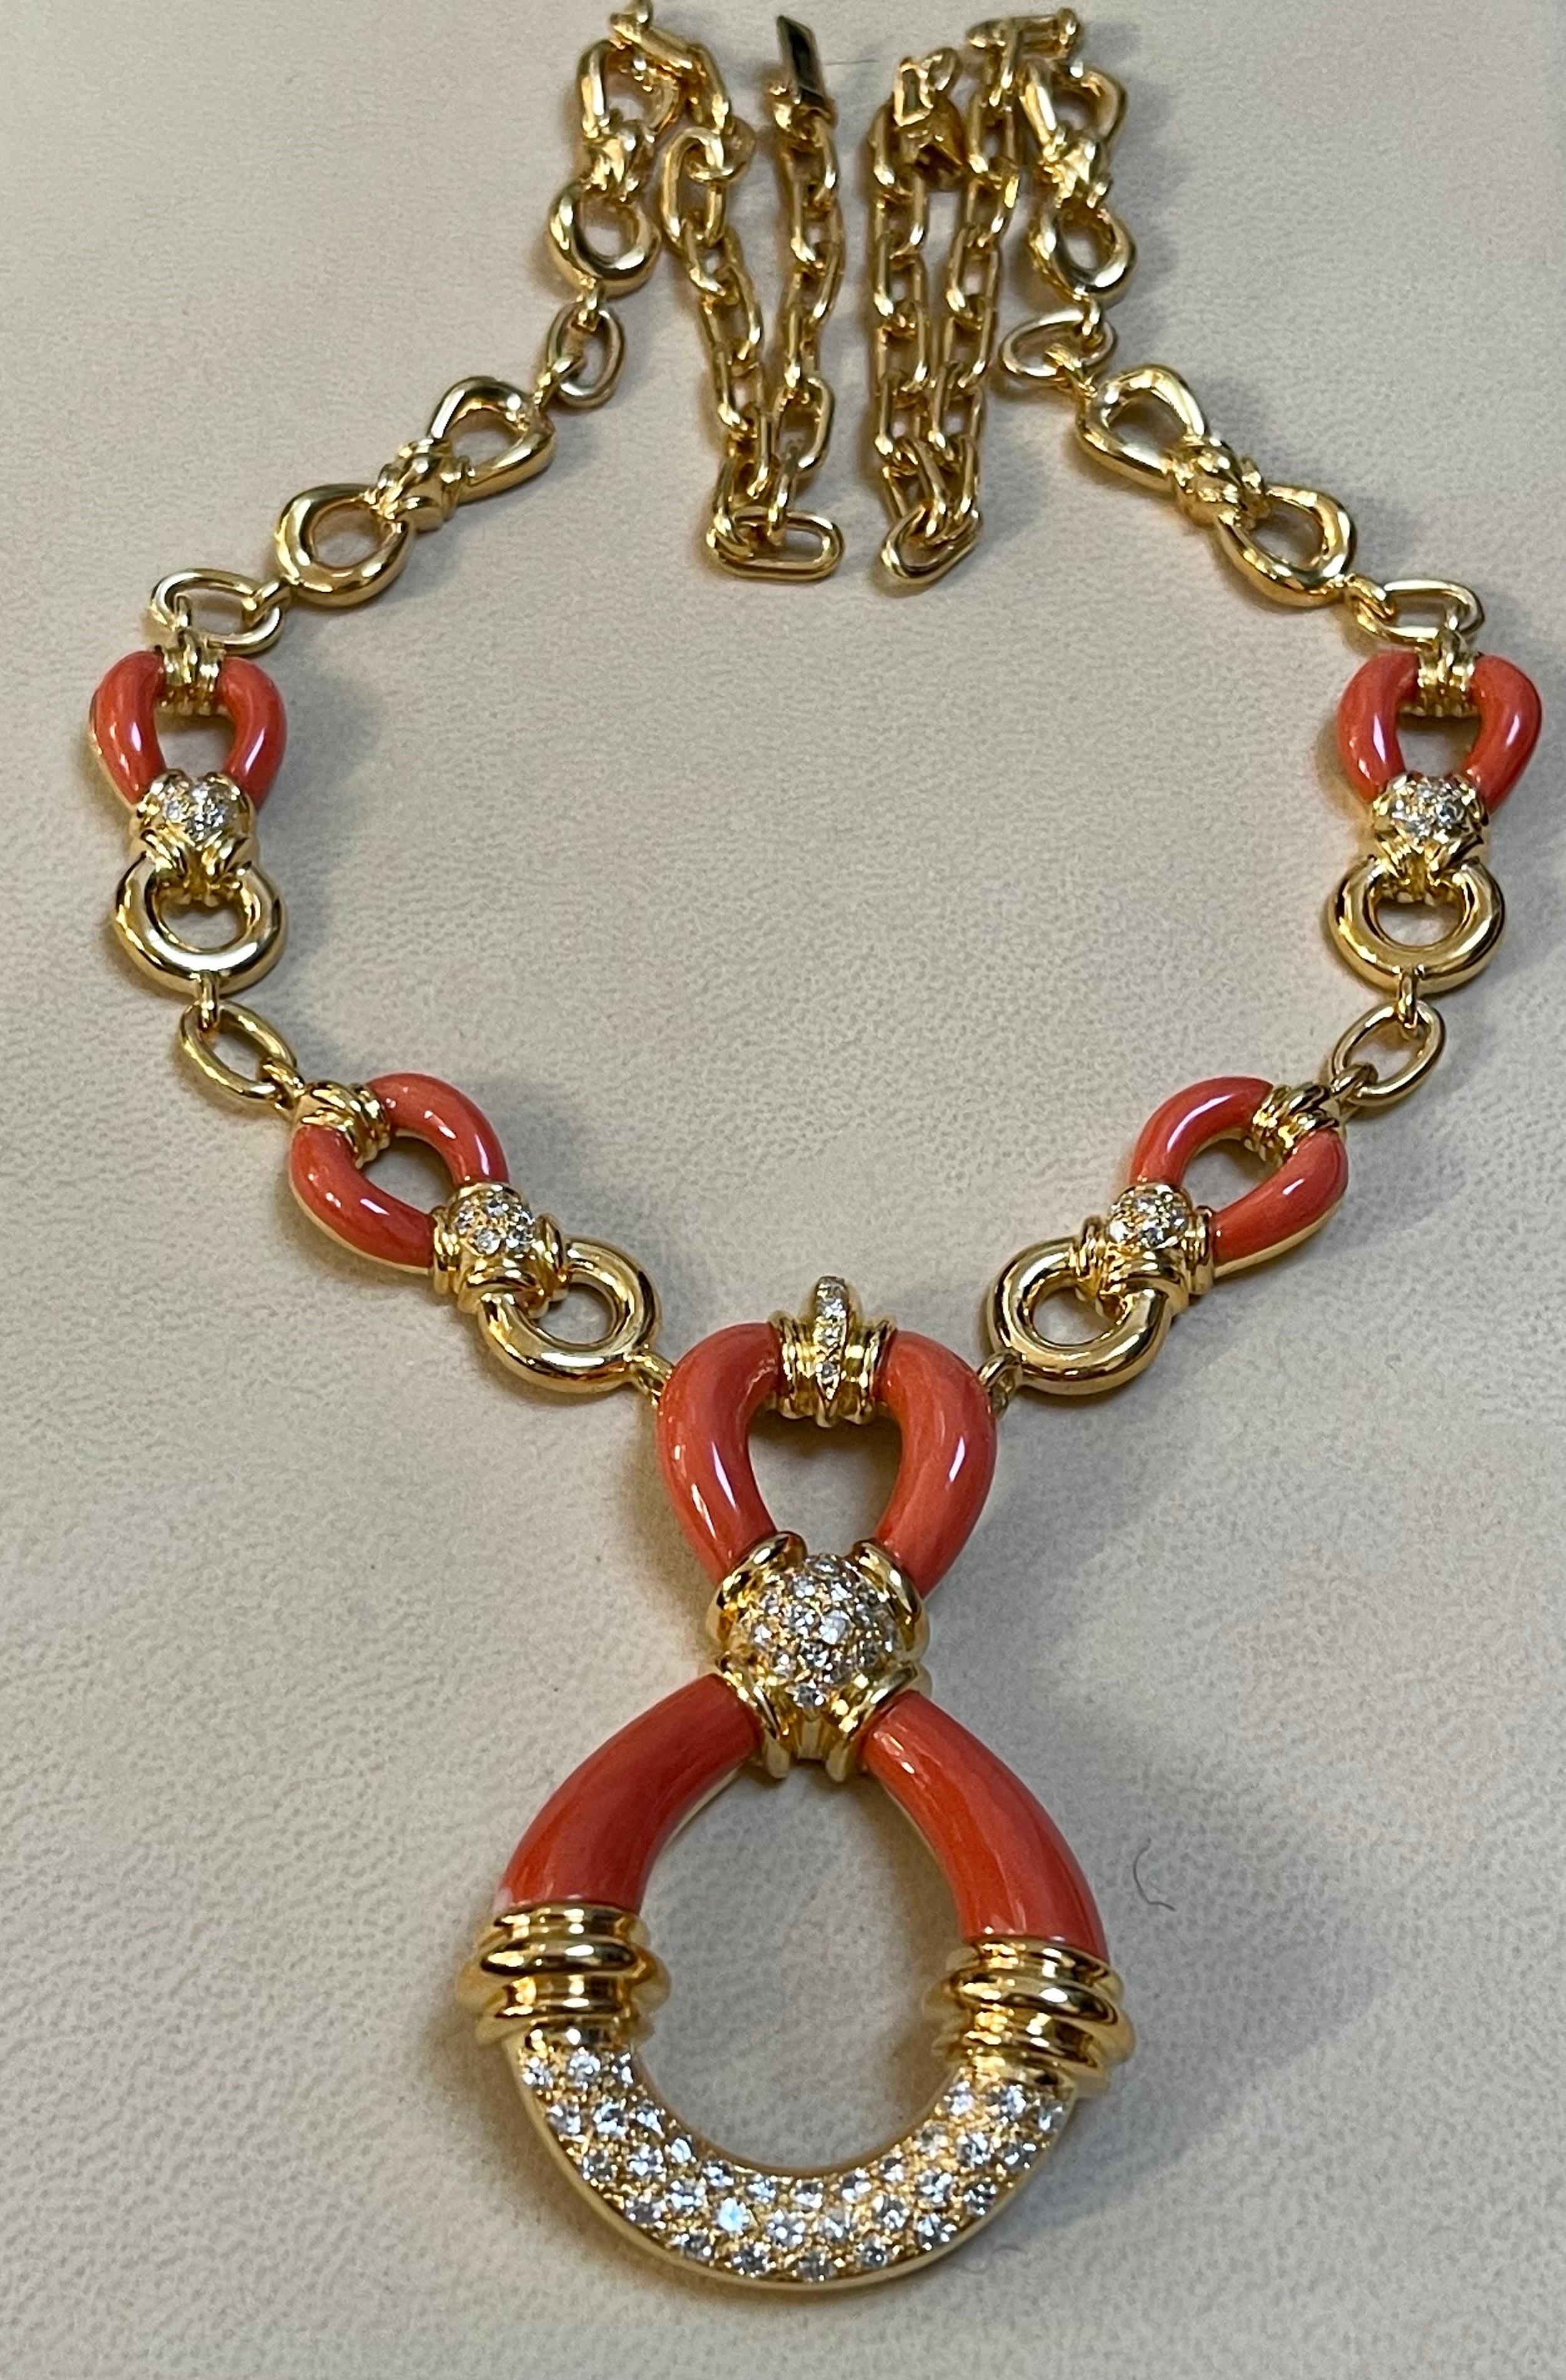 coral necklace designs in gold with price